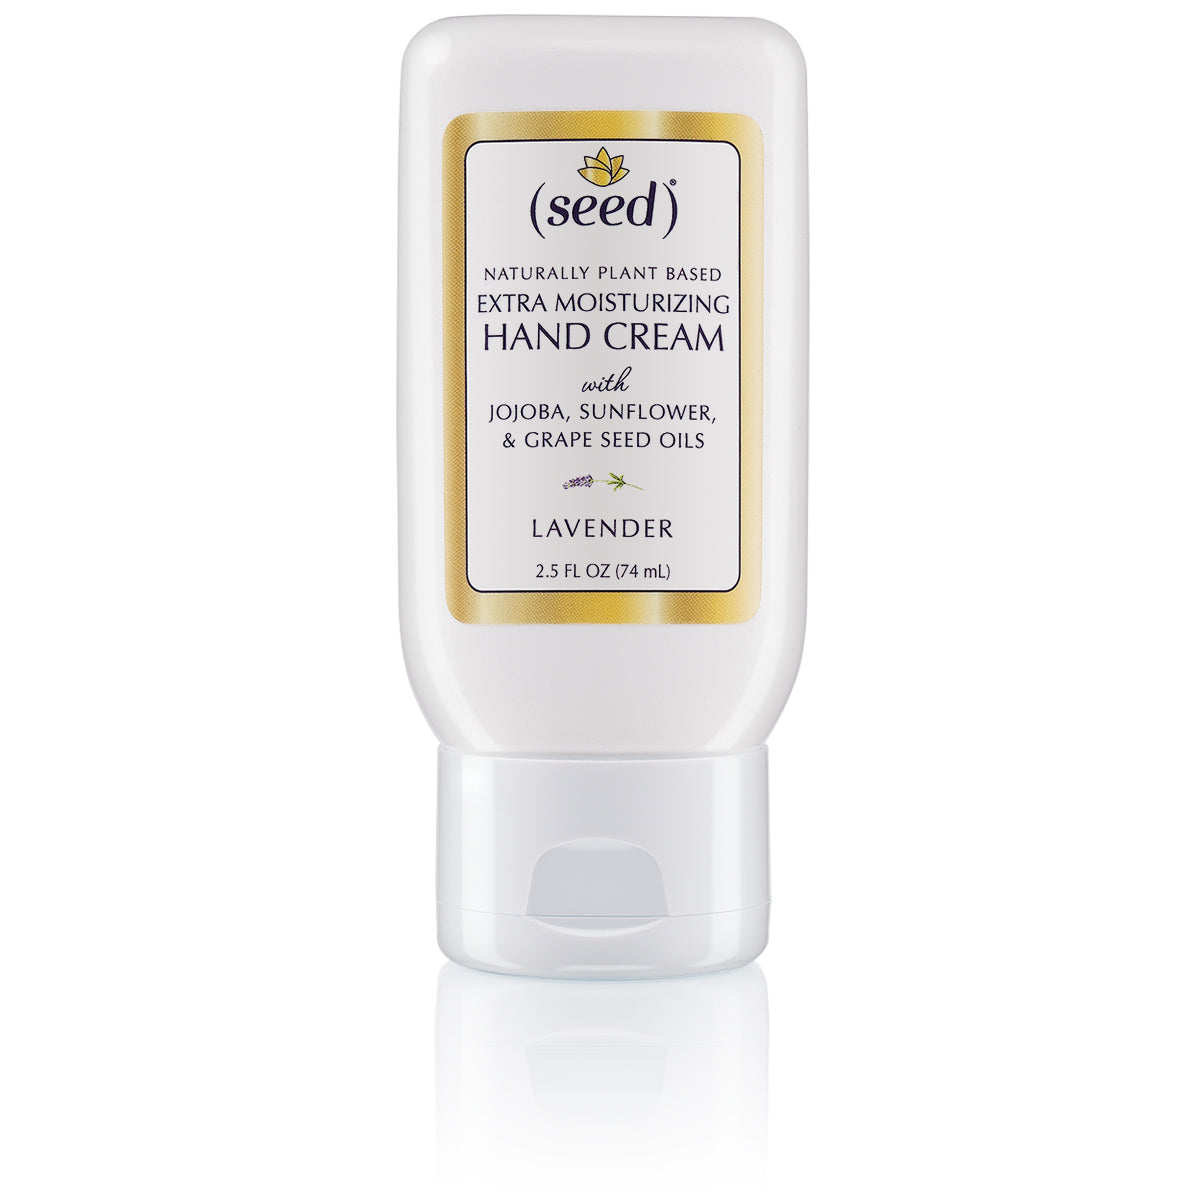 Seed Lavender Extra Moisturizing Hand Cream, formerly known as Seed Healthy Hand Cream